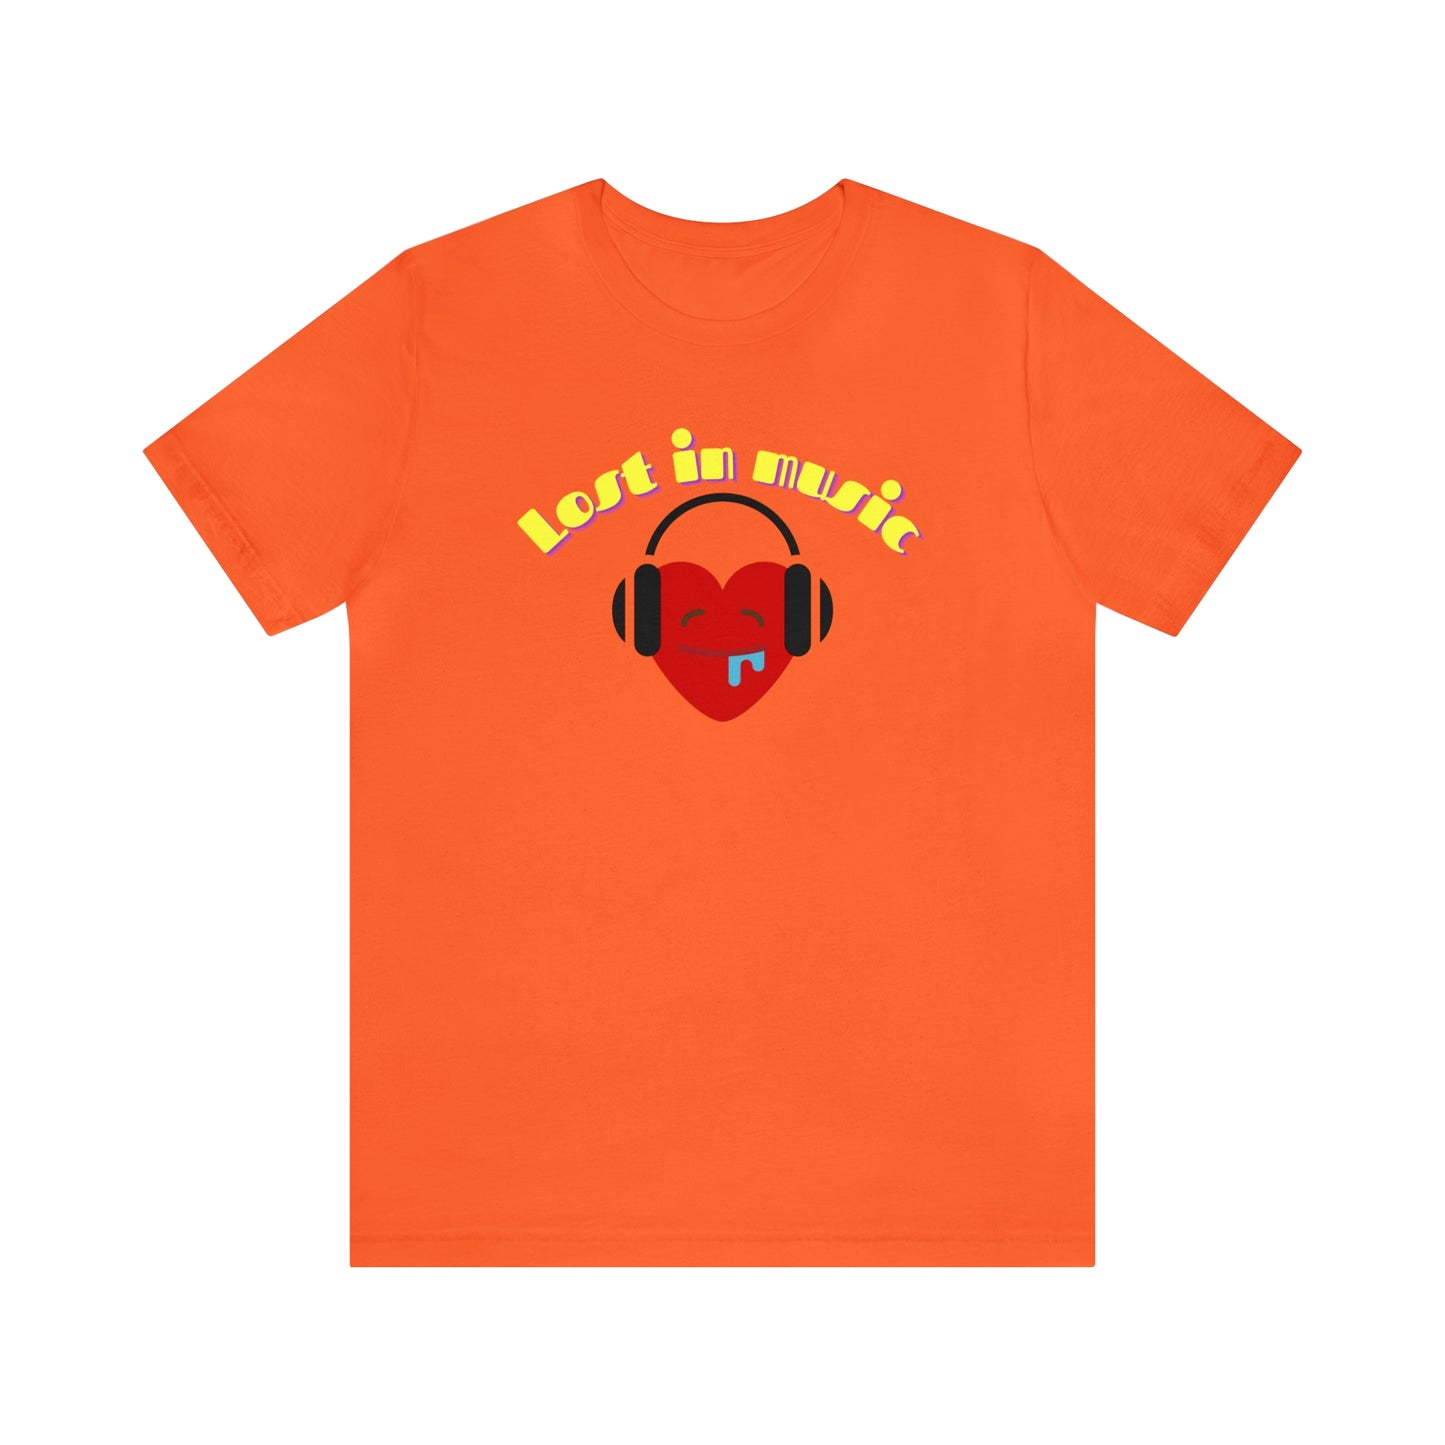 A T-shirt with the text "Lost in music" and a picture of a cartoon heart drooling while it's listening to music on its headphones